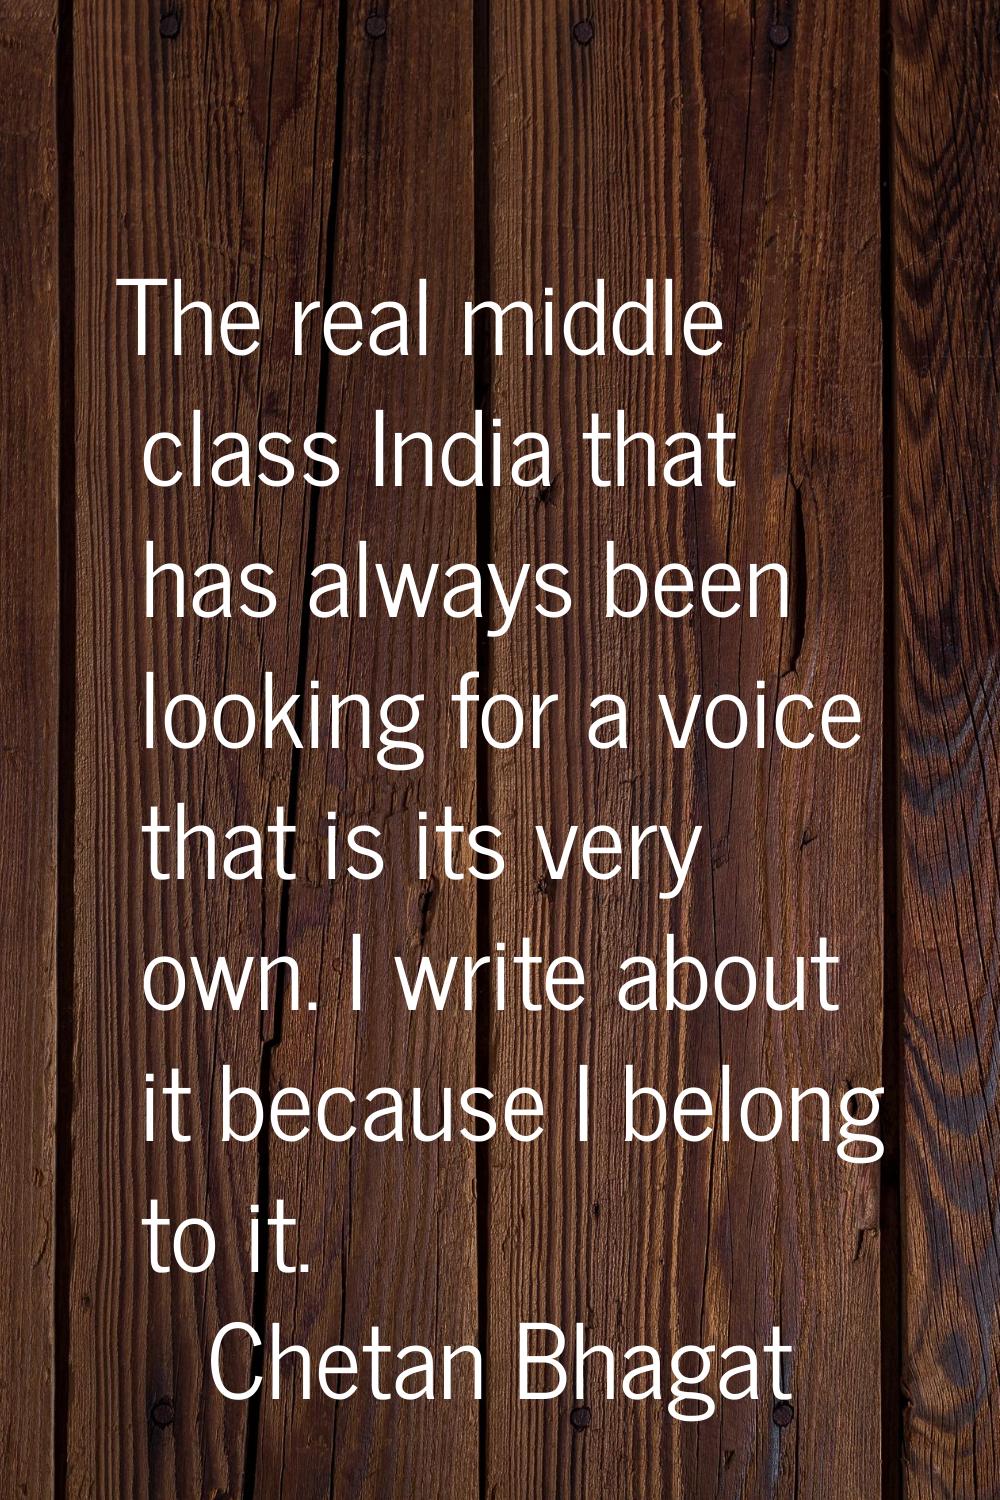 The real middle class India that has always been looking for a voice that is its very own. I write 